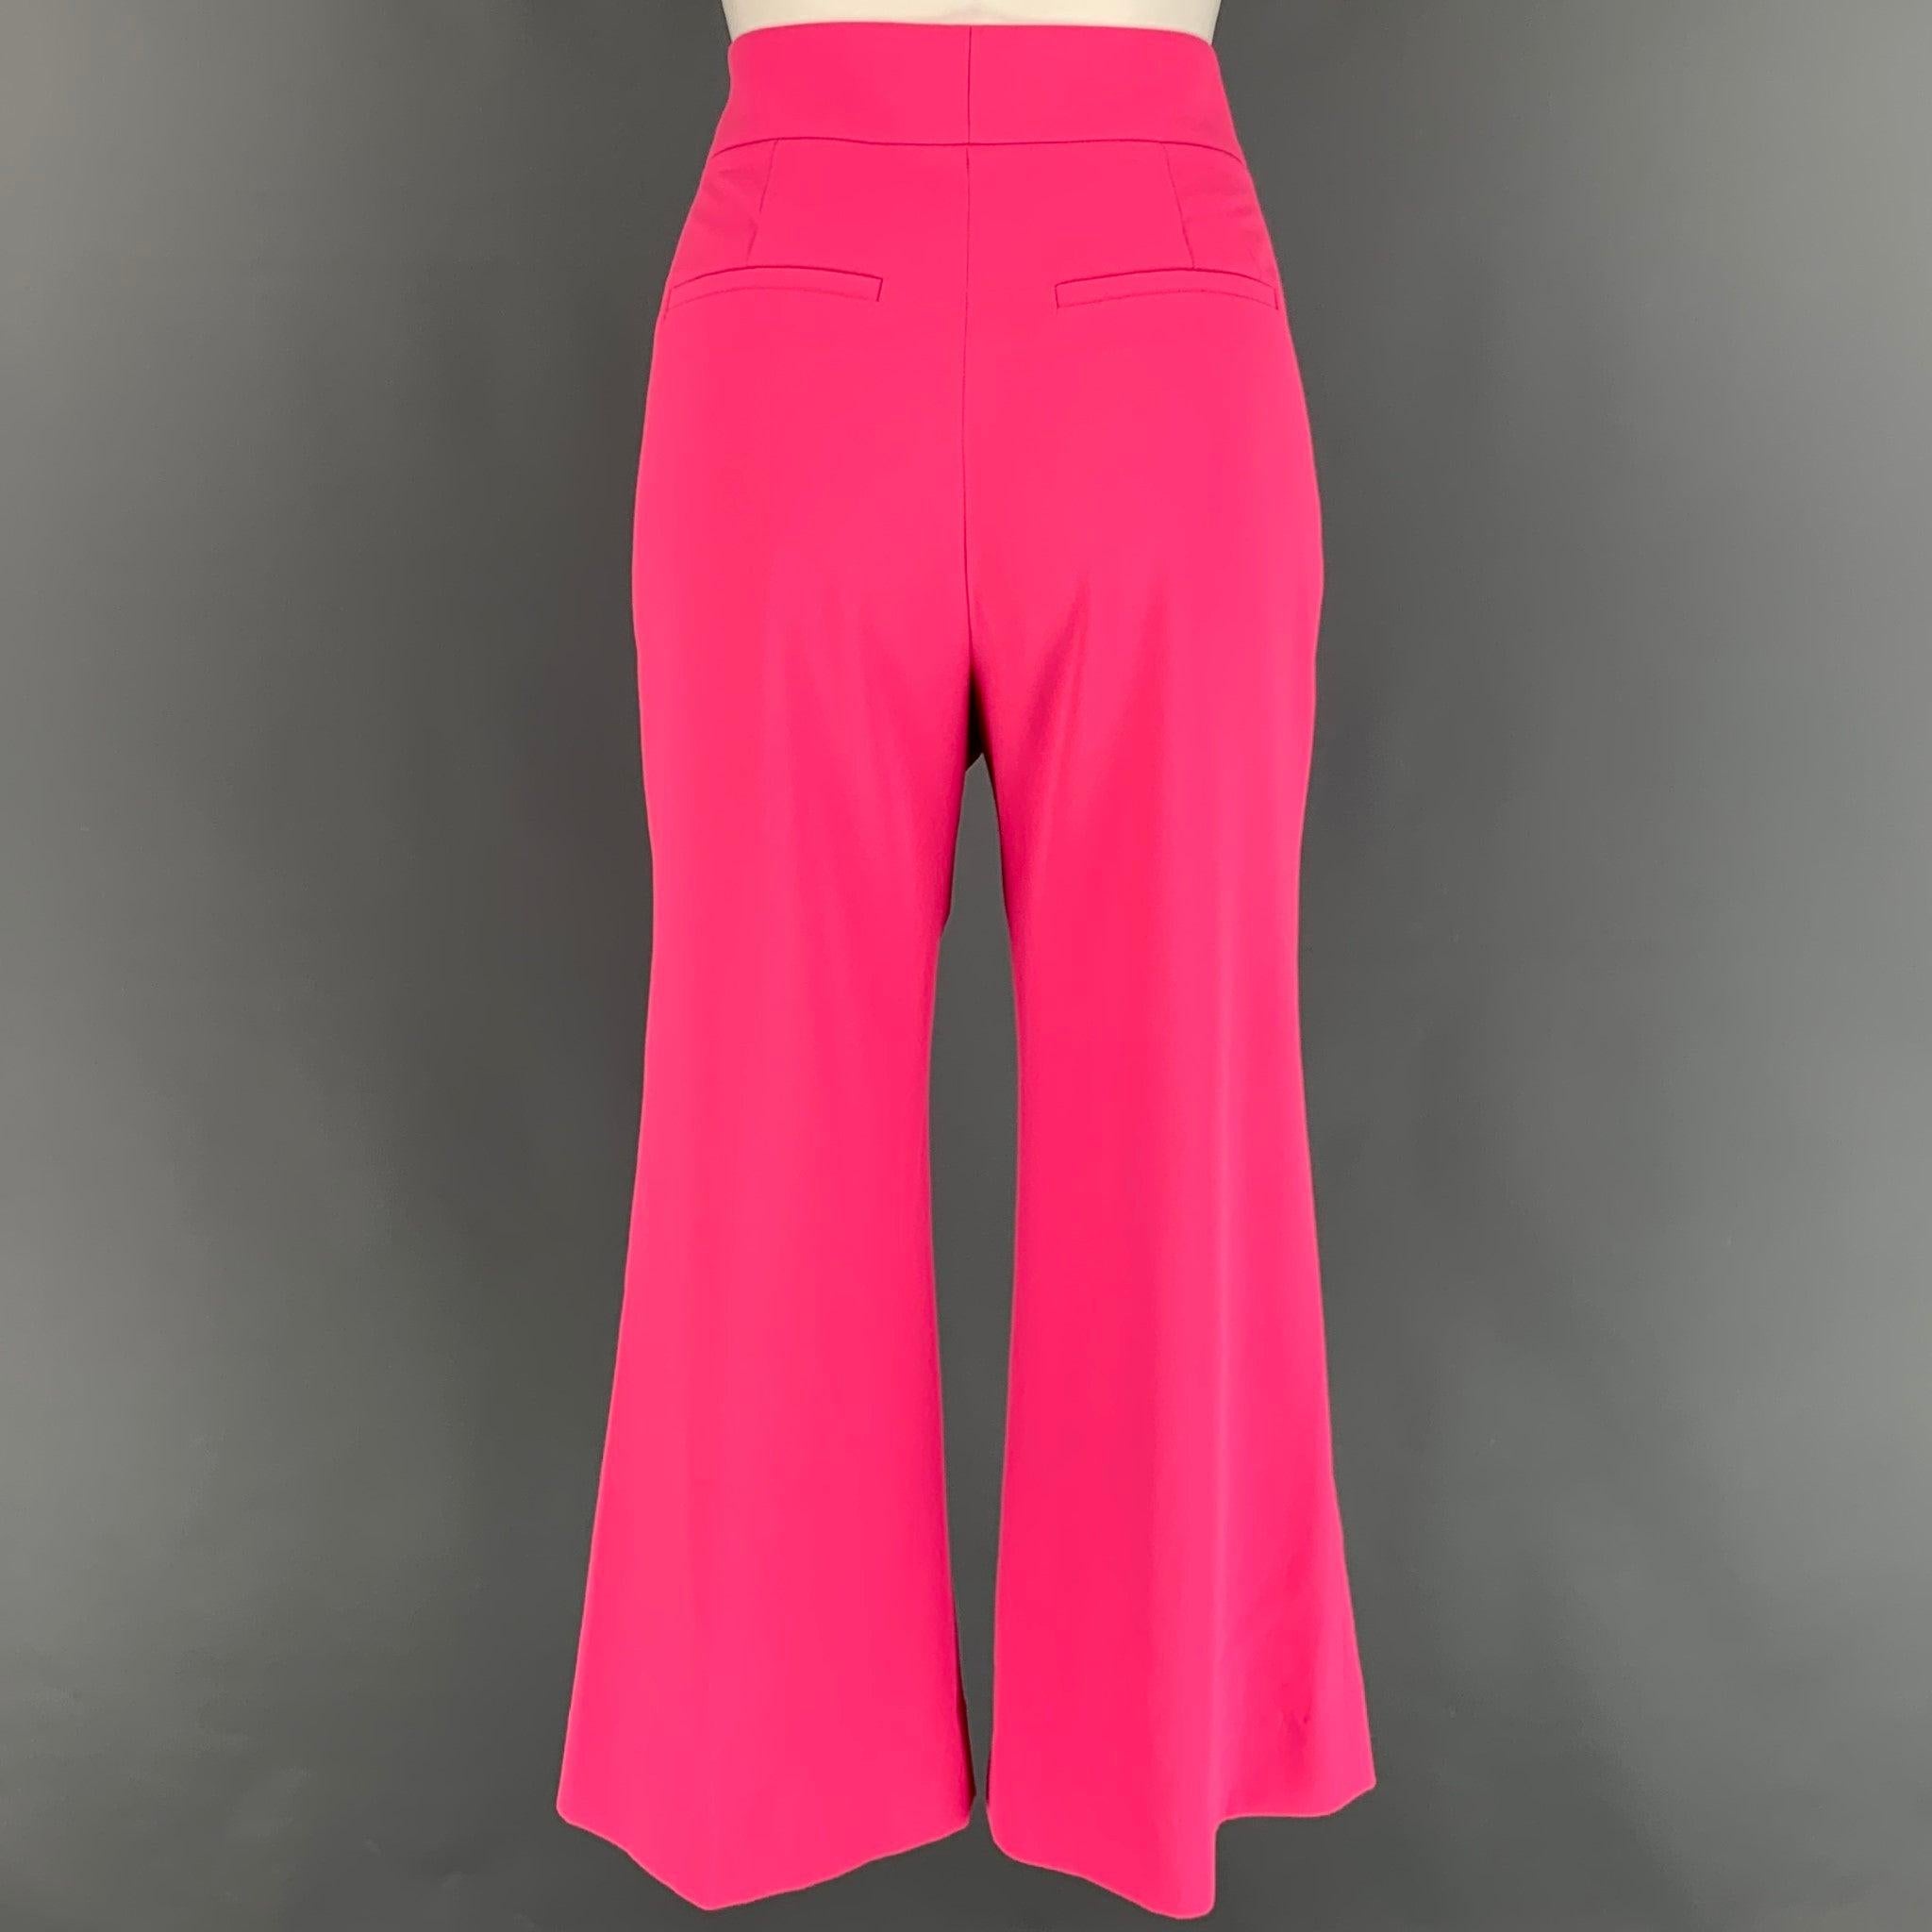 ALICE + OLIVIA dress pants comes in a pink polyester featuring a cropped leg, front tab, and a zip fly closure. Very Good
 Pre-Owned Condition. 
 

 Marked:  2 
 

 Measurements: 
  Waist: 26 inches Rise: 11.5 inches Inseam: 24.5 inches 
  
  
  
